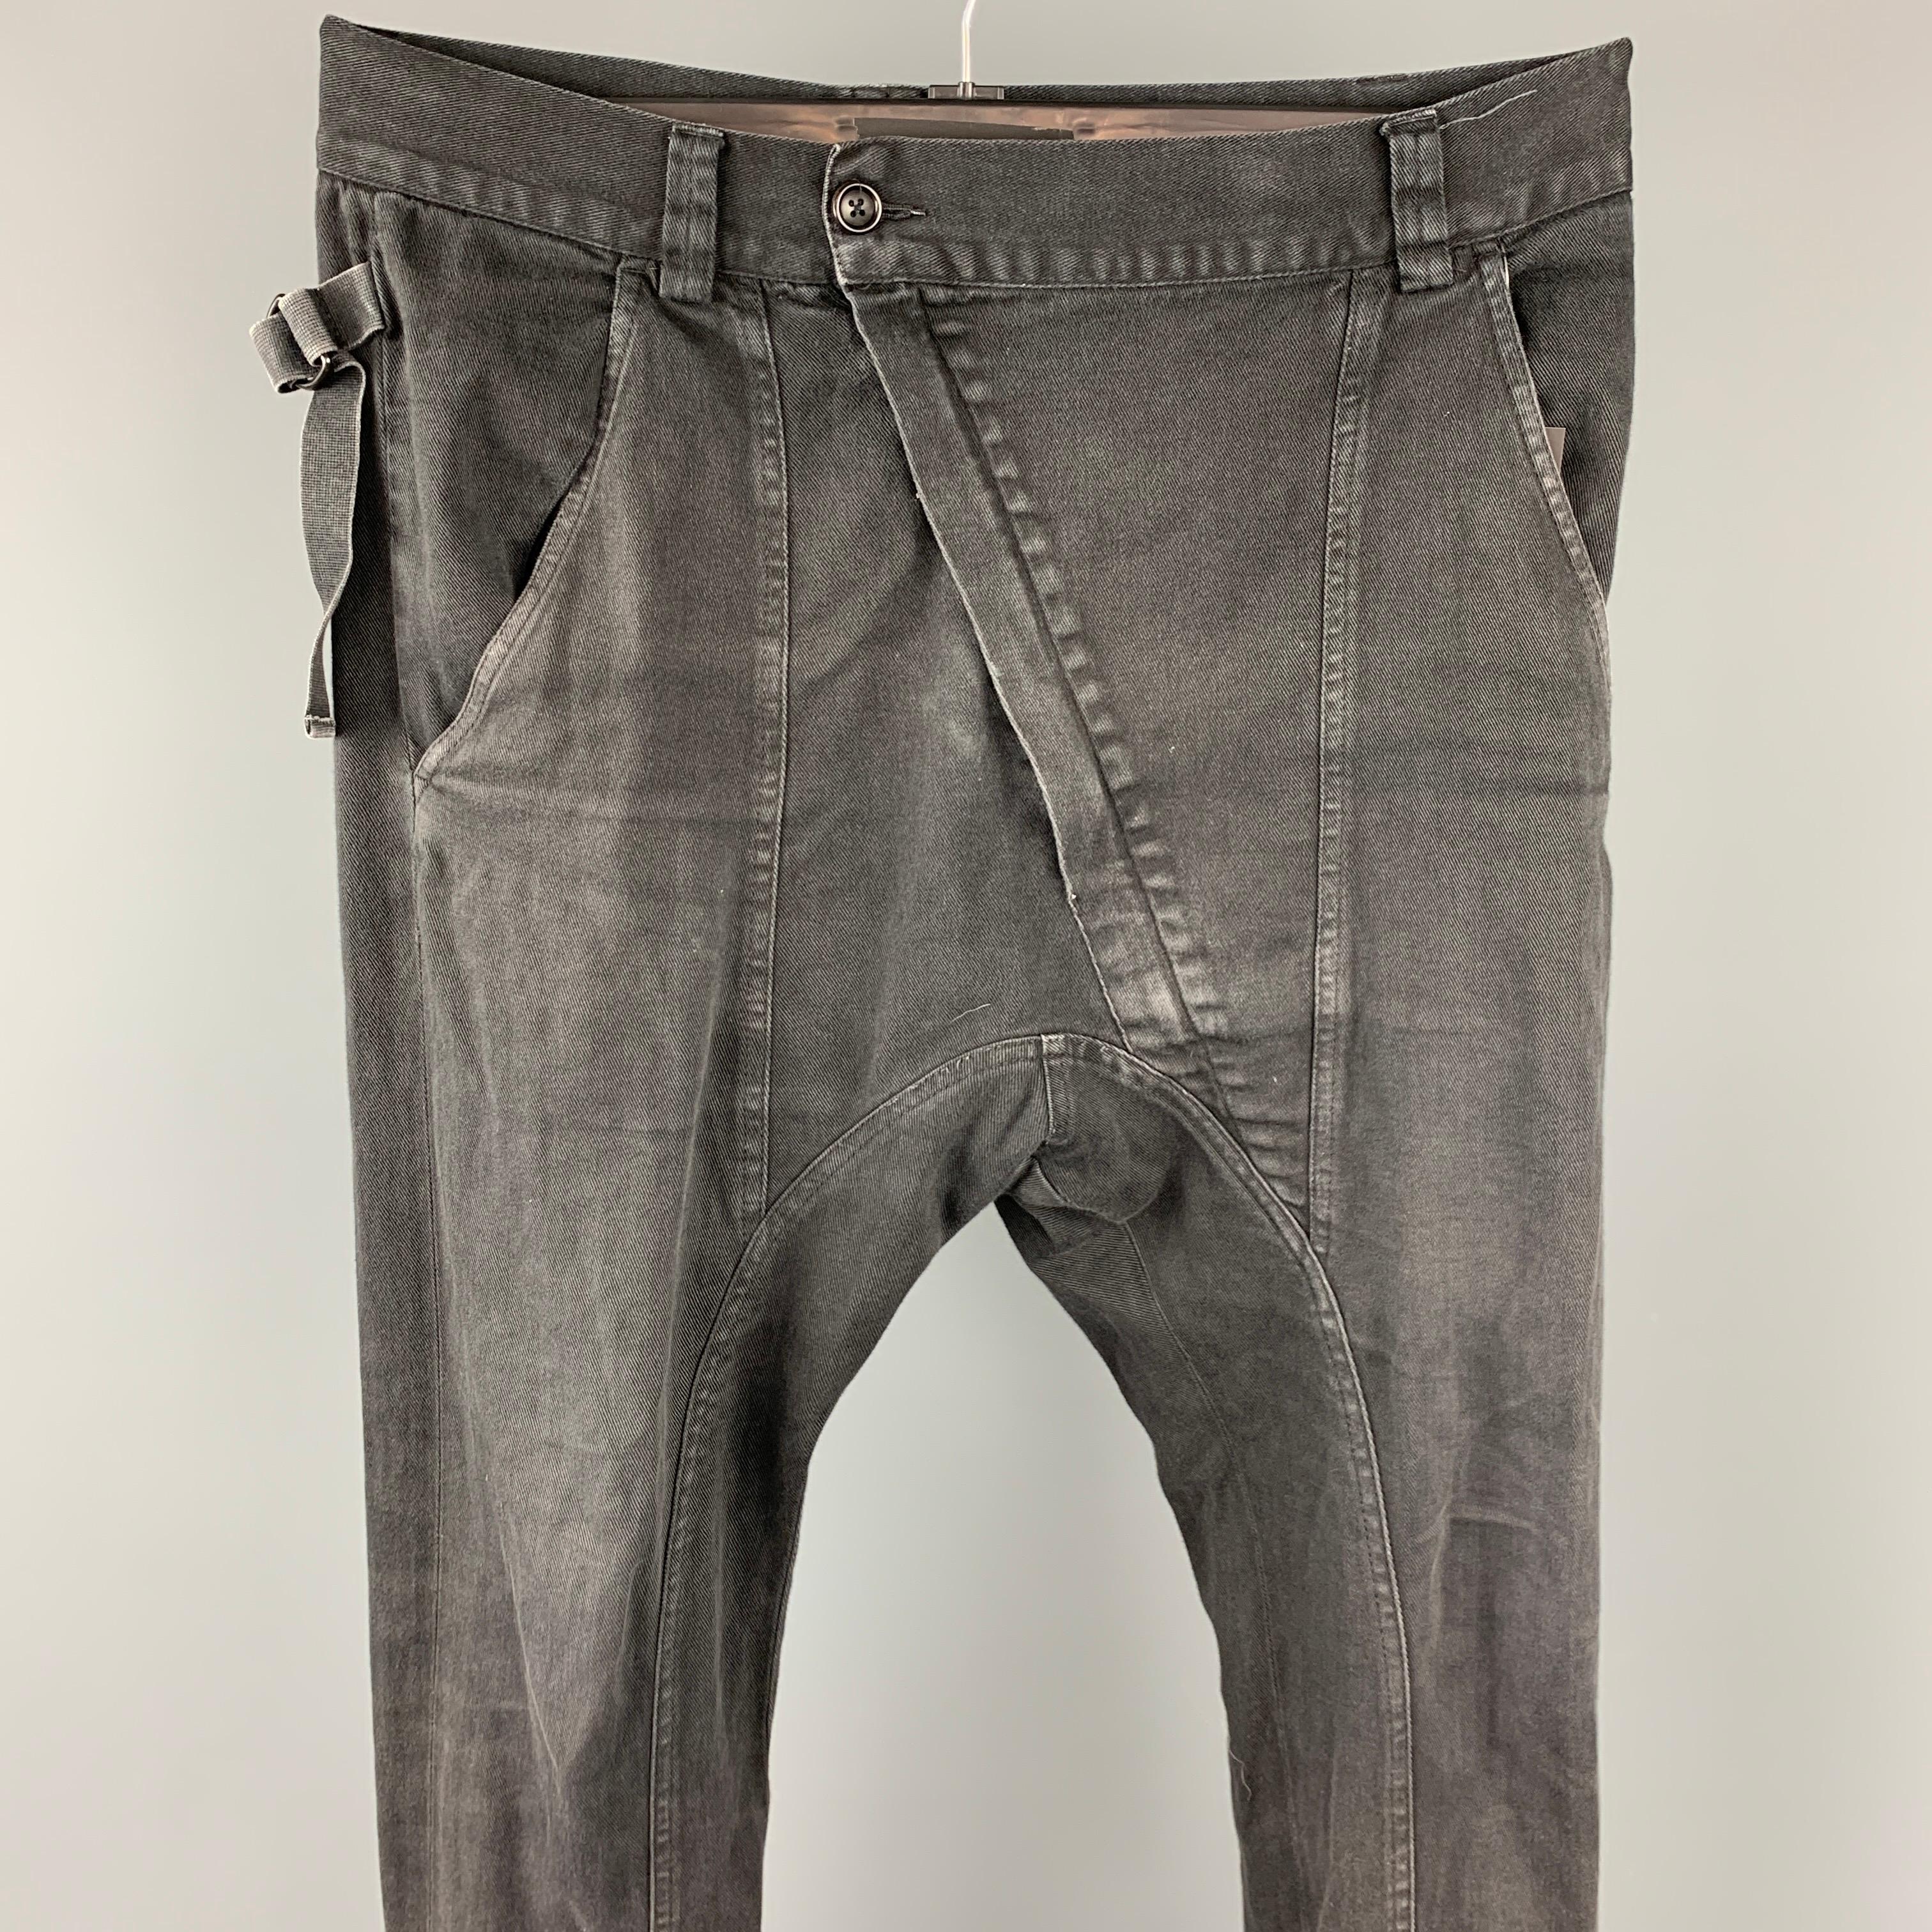 ALEXANDRE PLOKHOV casual pants comes in a black cotton featuring a drop-crotch style, adjustable back straps, and a diagonal zip up closure. Made in Italy.

Good Pre-Owned Condition.
Marked: 46

Measurements:

Waist: 34 in.
Rise: 16 in.
Inseam: 31